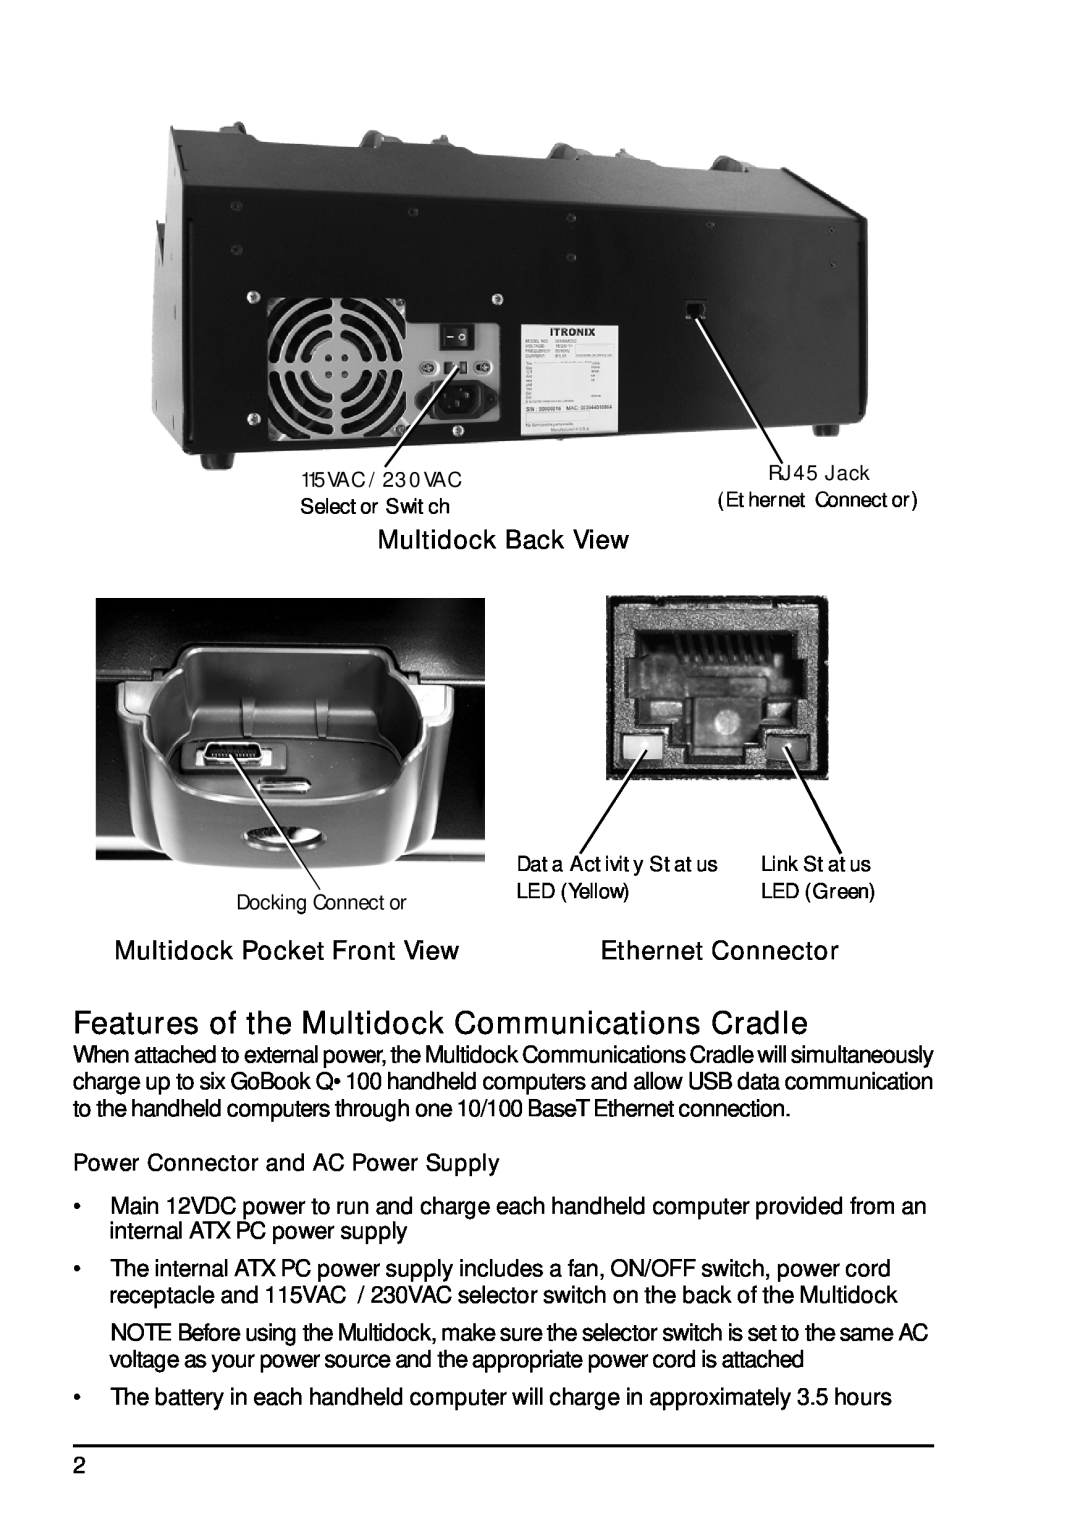 Itron Tech Q100 manual Features of the Multidock Communications Cradle, Multidock Back View, Multidock Pocket Front View 